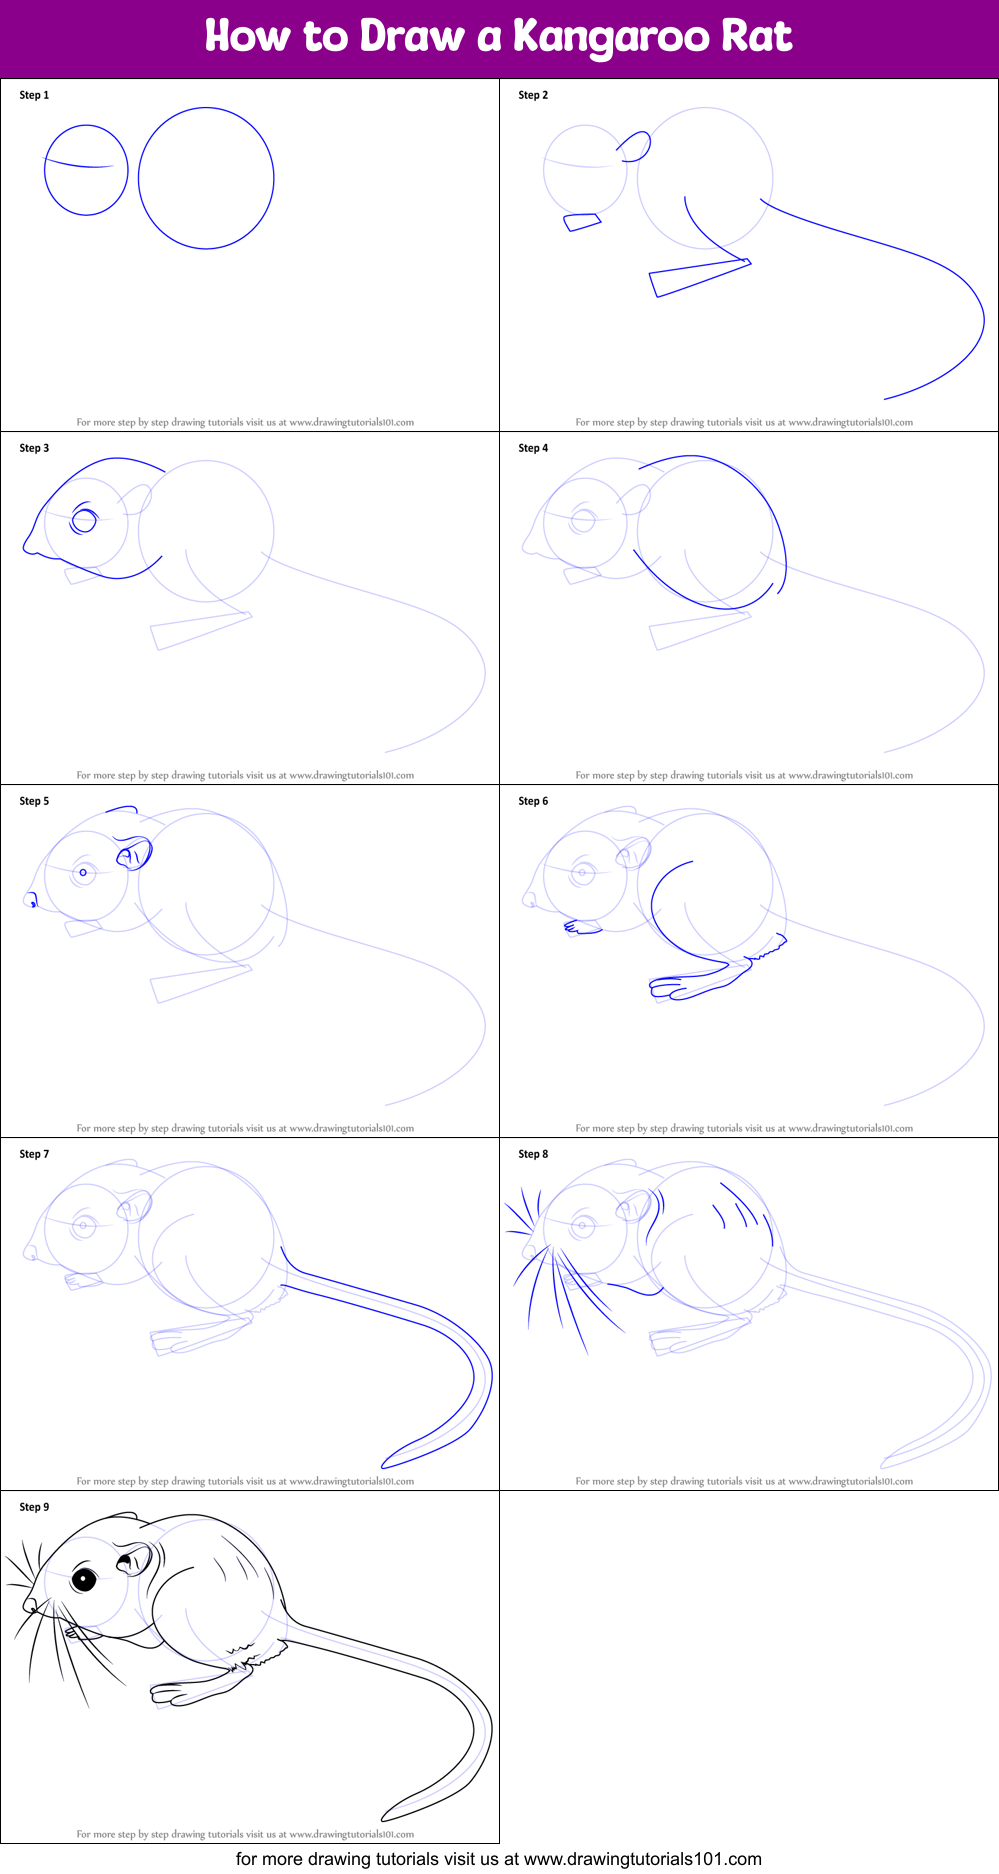 How to Draw a Kangaroo Rat printable step by step drawing sheet